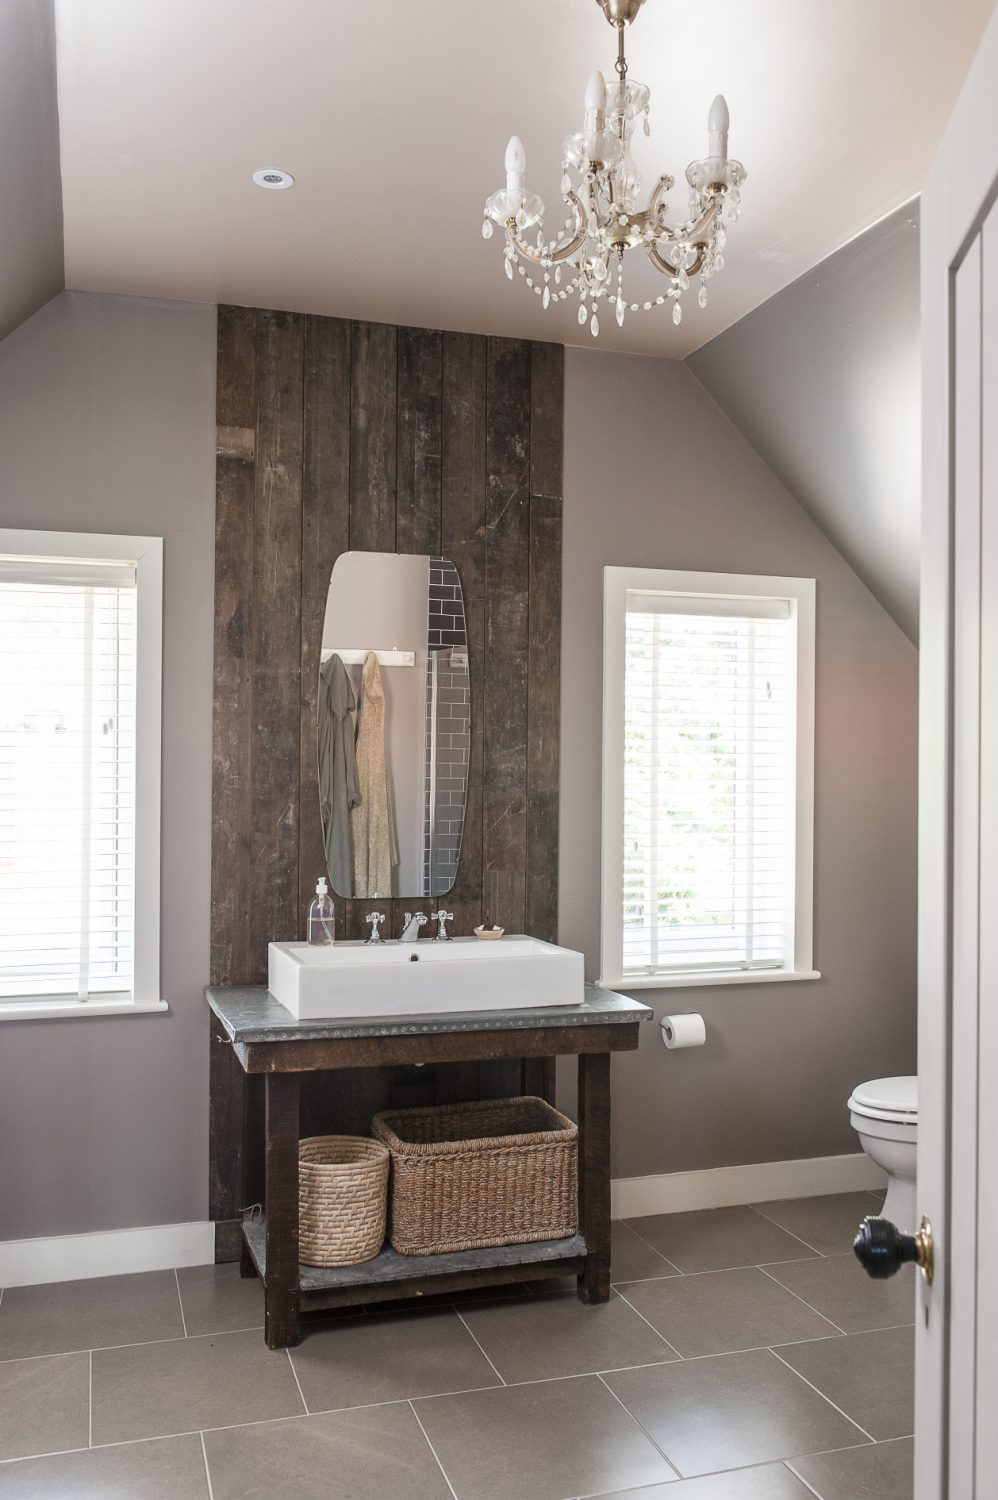 The bathroom is a gentle mushroom with cool white woodwork. The basin sits on an antique lead-topped table backed by a ceiling height panel made from reclaimed floorboards